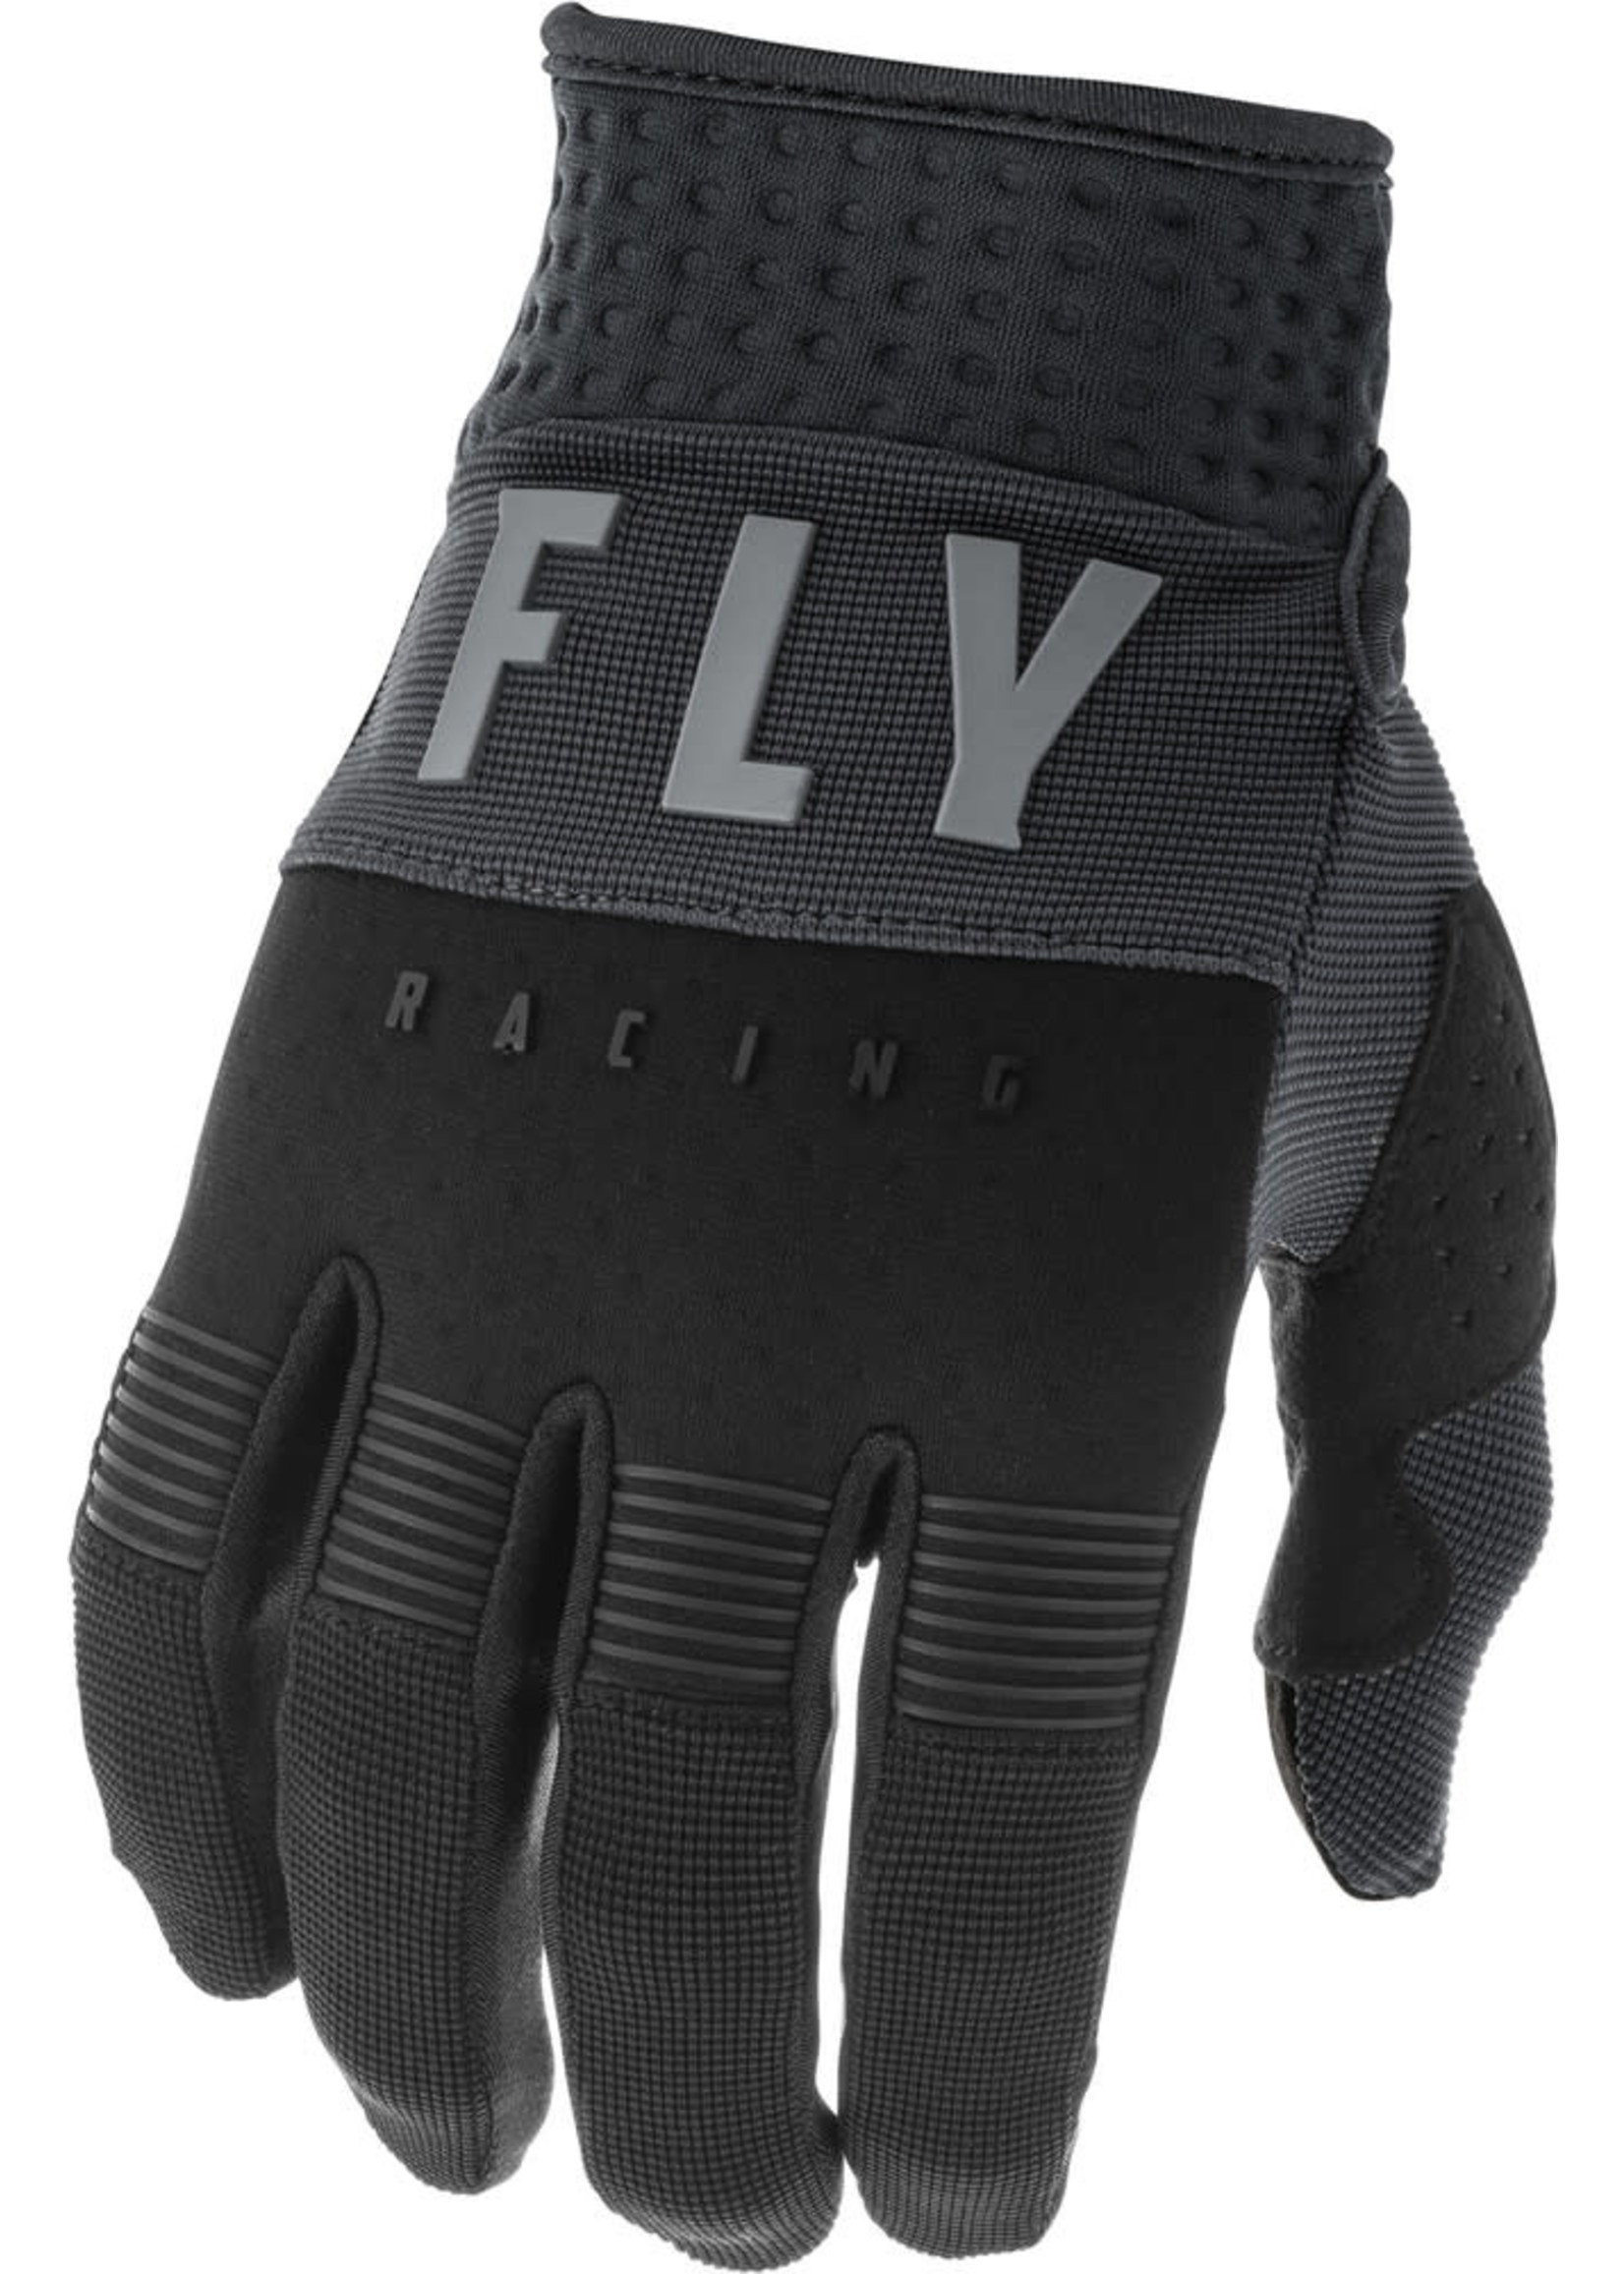 FLY RACING FLY RACING F-16 GLOVE BLK/GRY YOUTH SZ 2